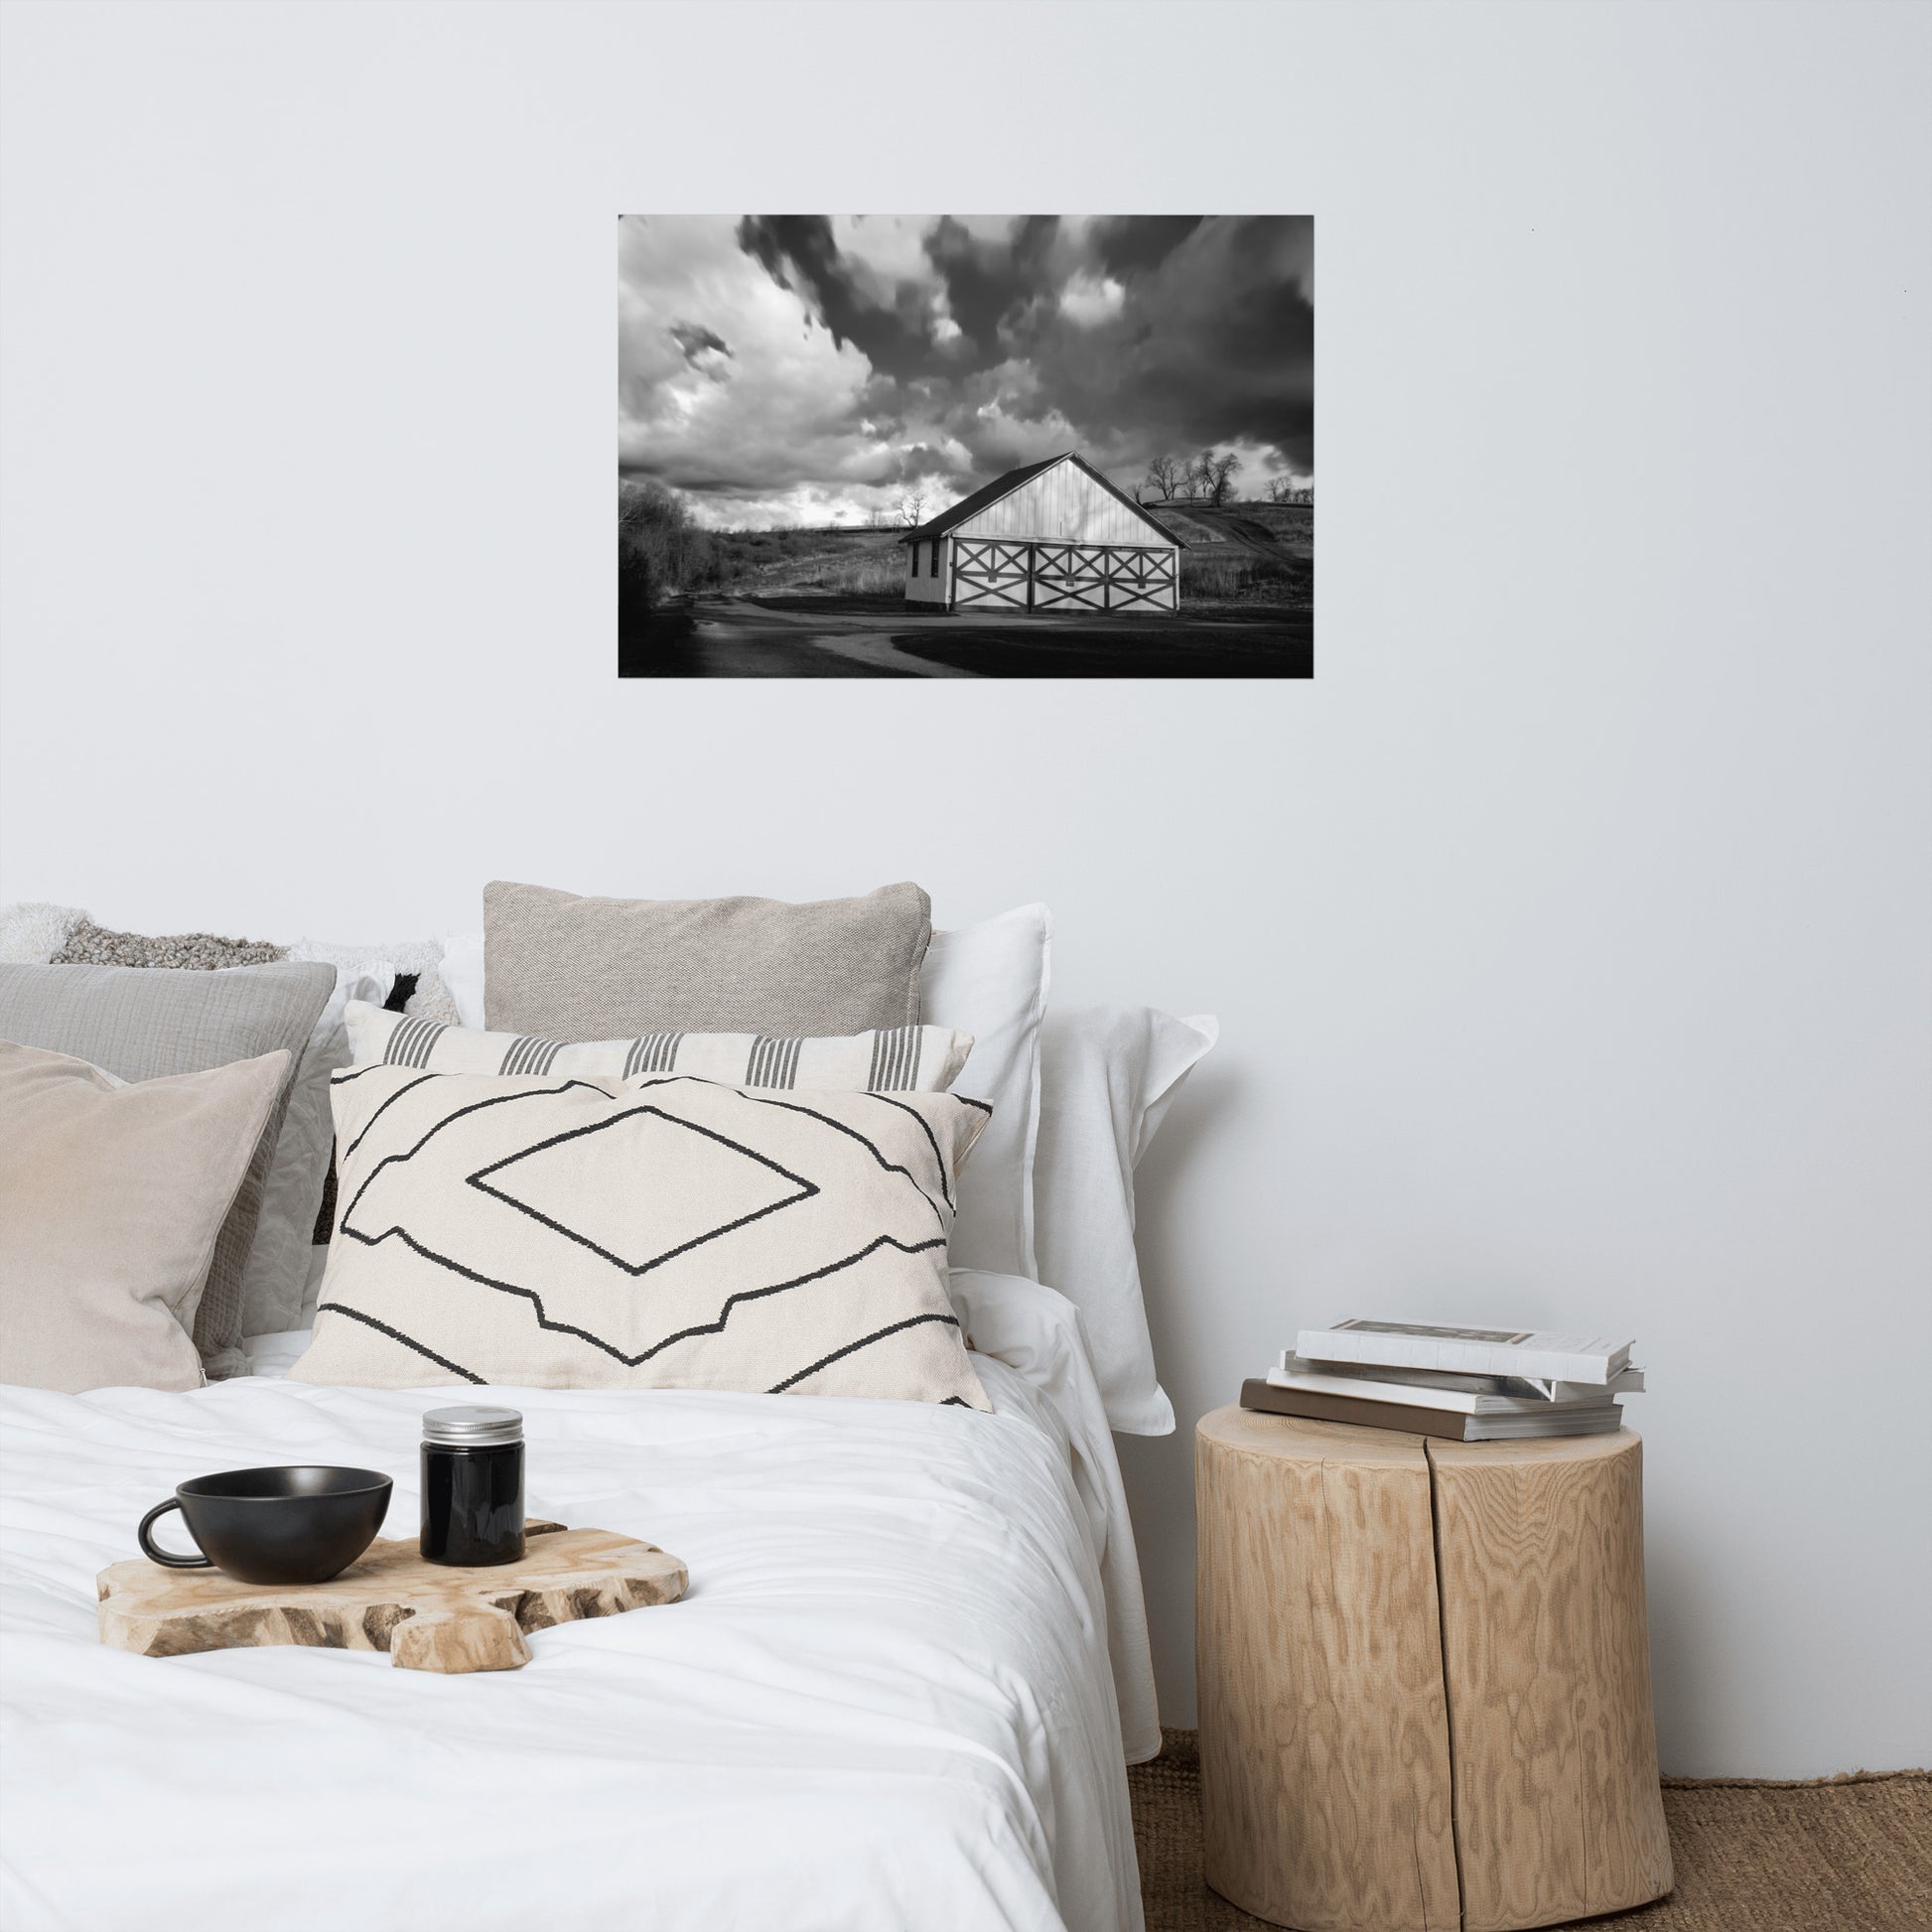 Master Bedroom Wall Decor Farmhouse: Aging Barn in the Morning Sun Black and White - Rural / Country Style Landscape / Nature Photograph Loose / Unframed / Frameless / Frameable Wall Art Print - Artwork